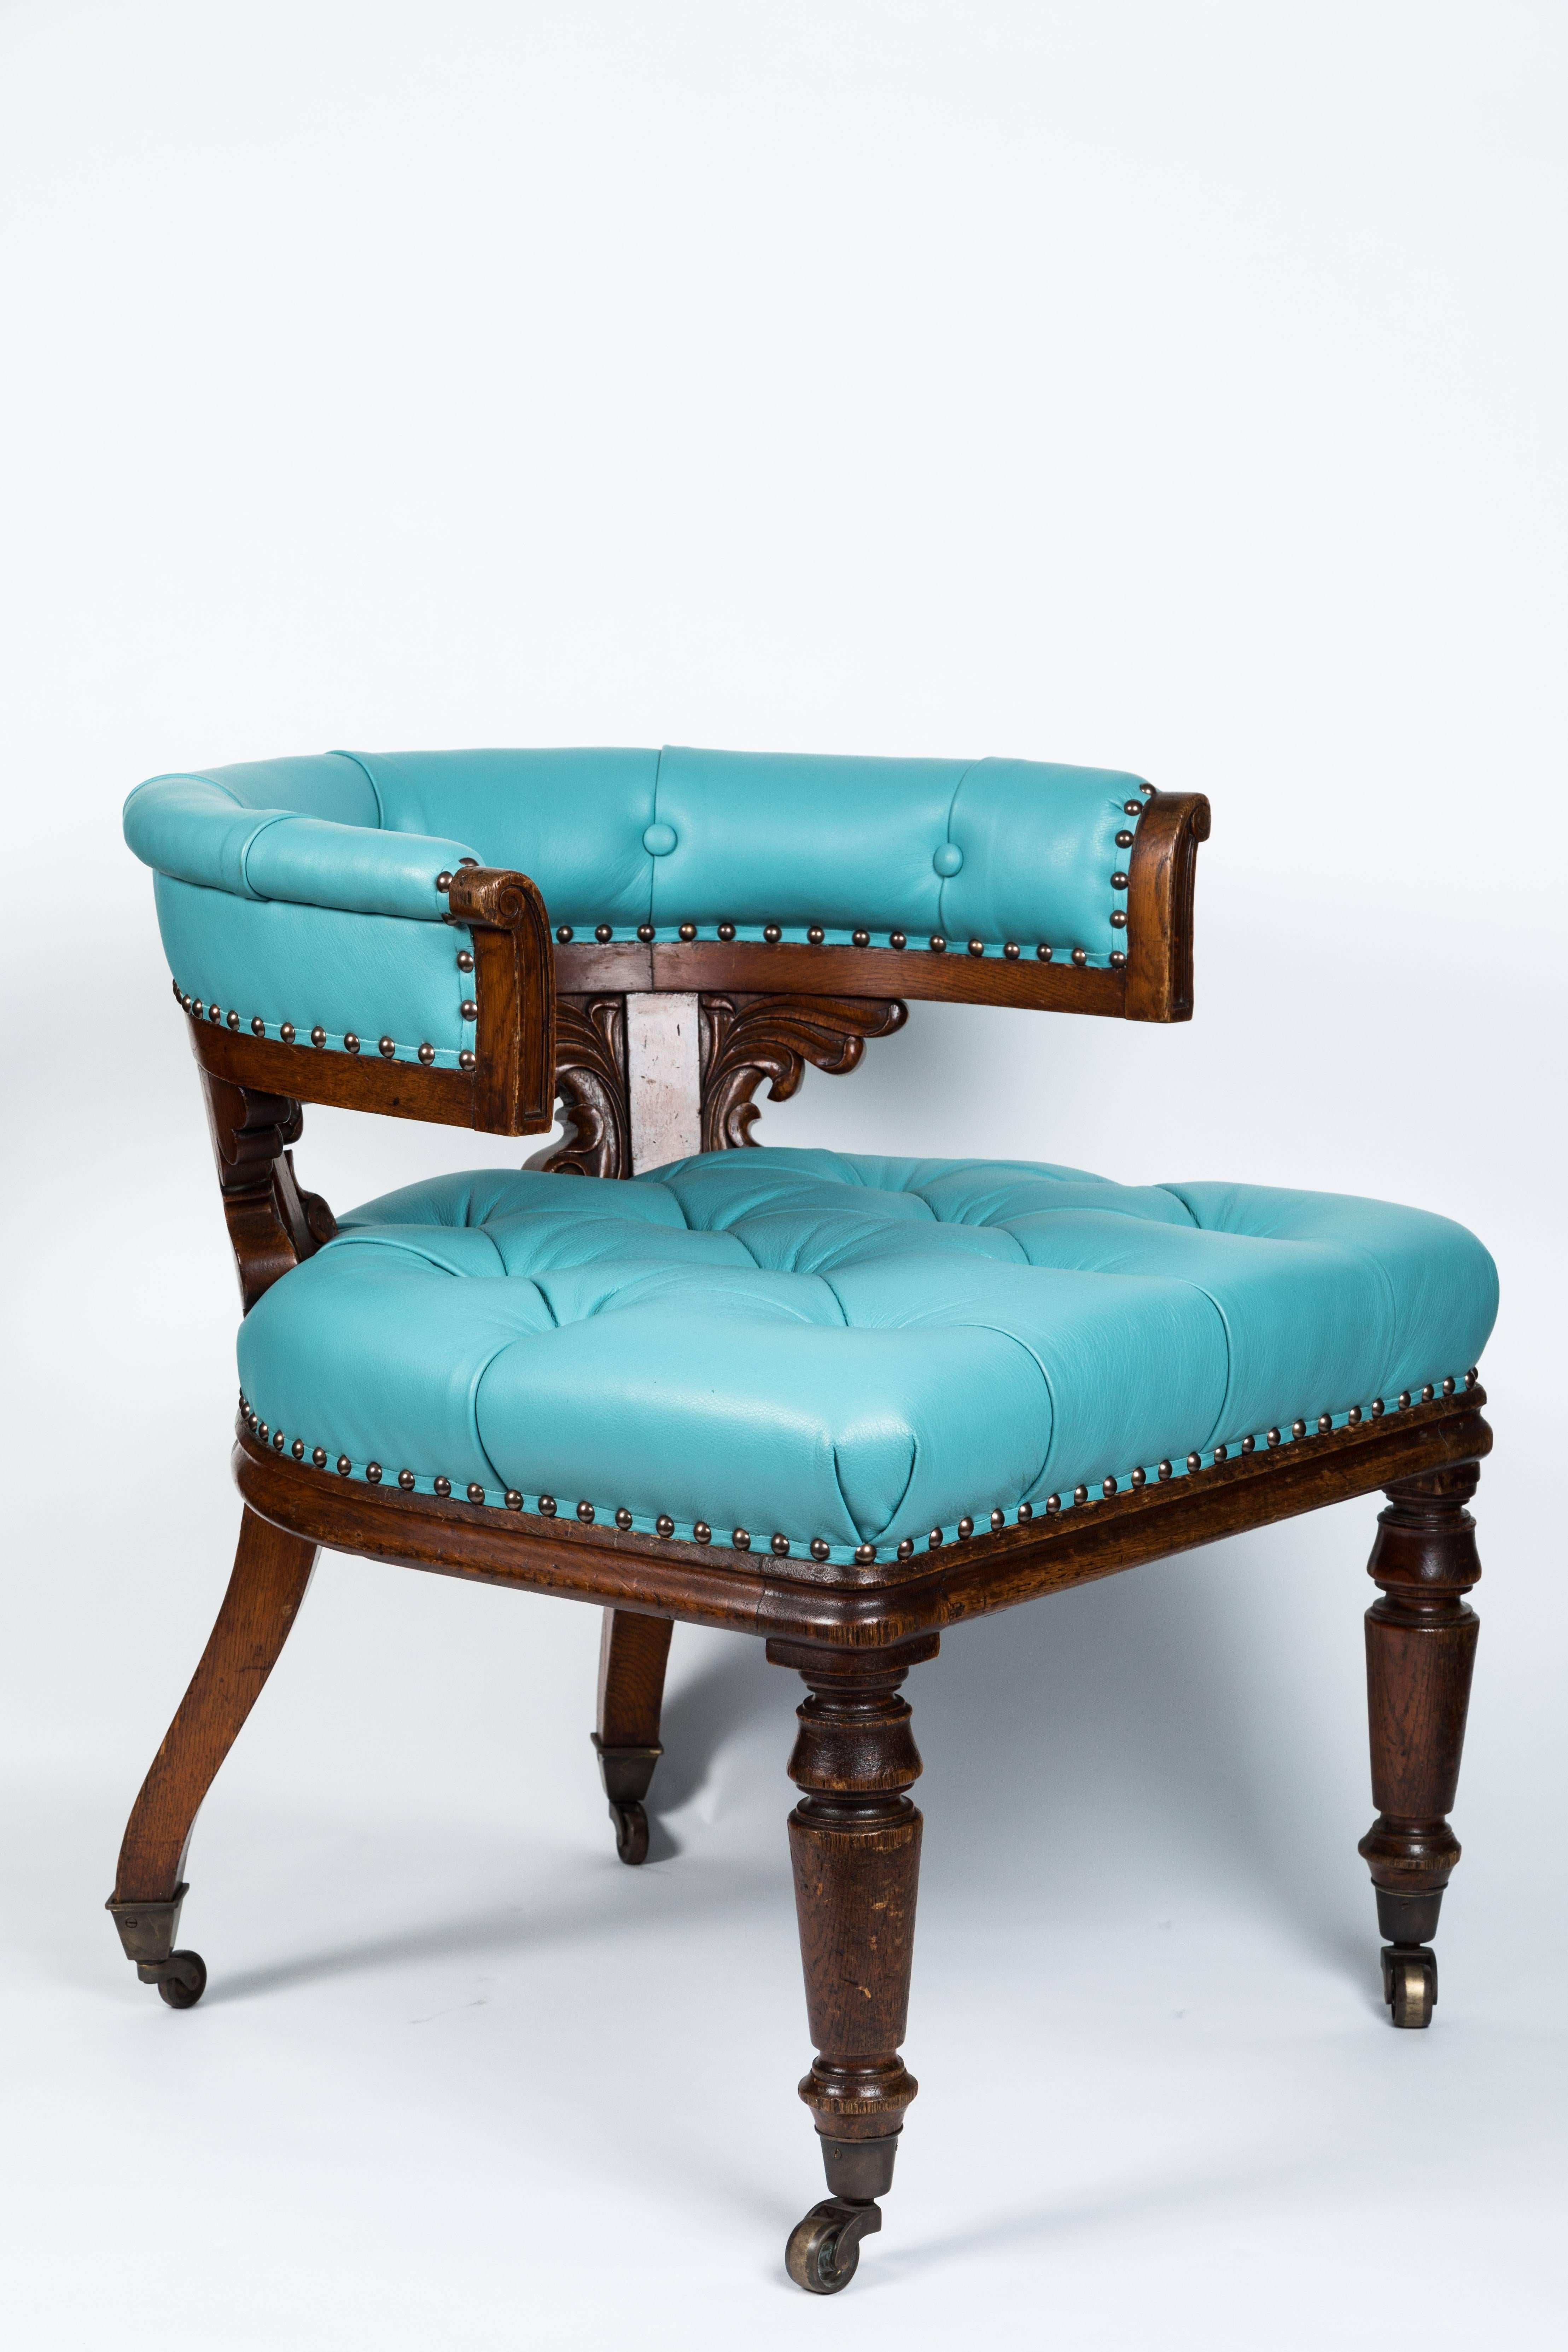 turquoise chairs leather